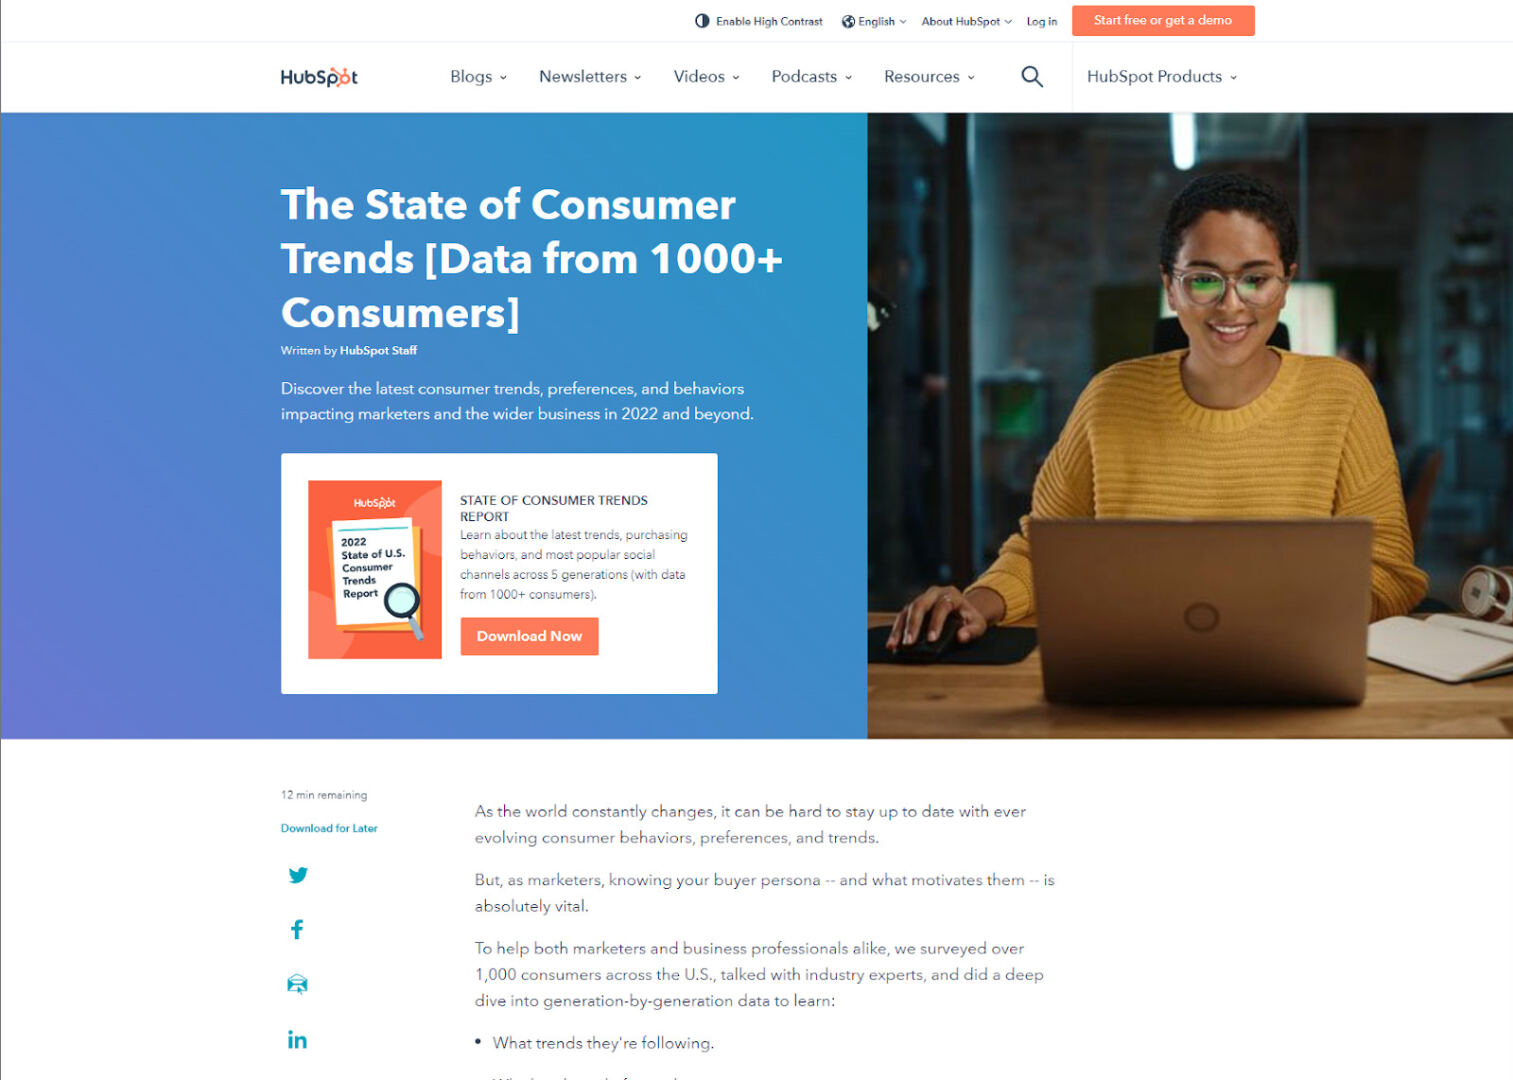 HubSpot's State of Consumer Trends